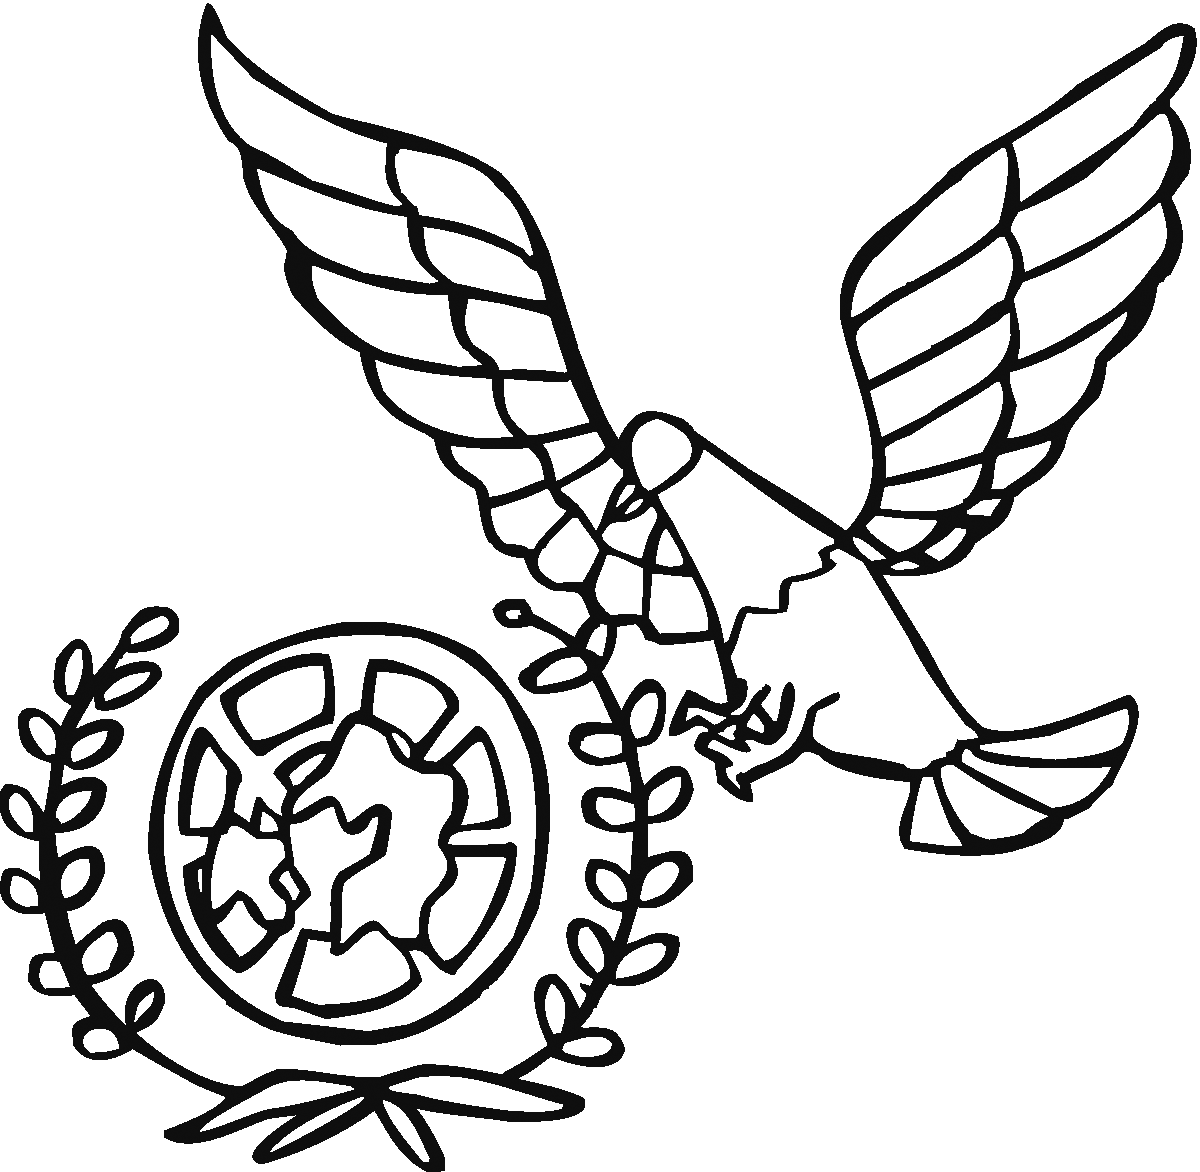 World Peace Dove Coloring Page